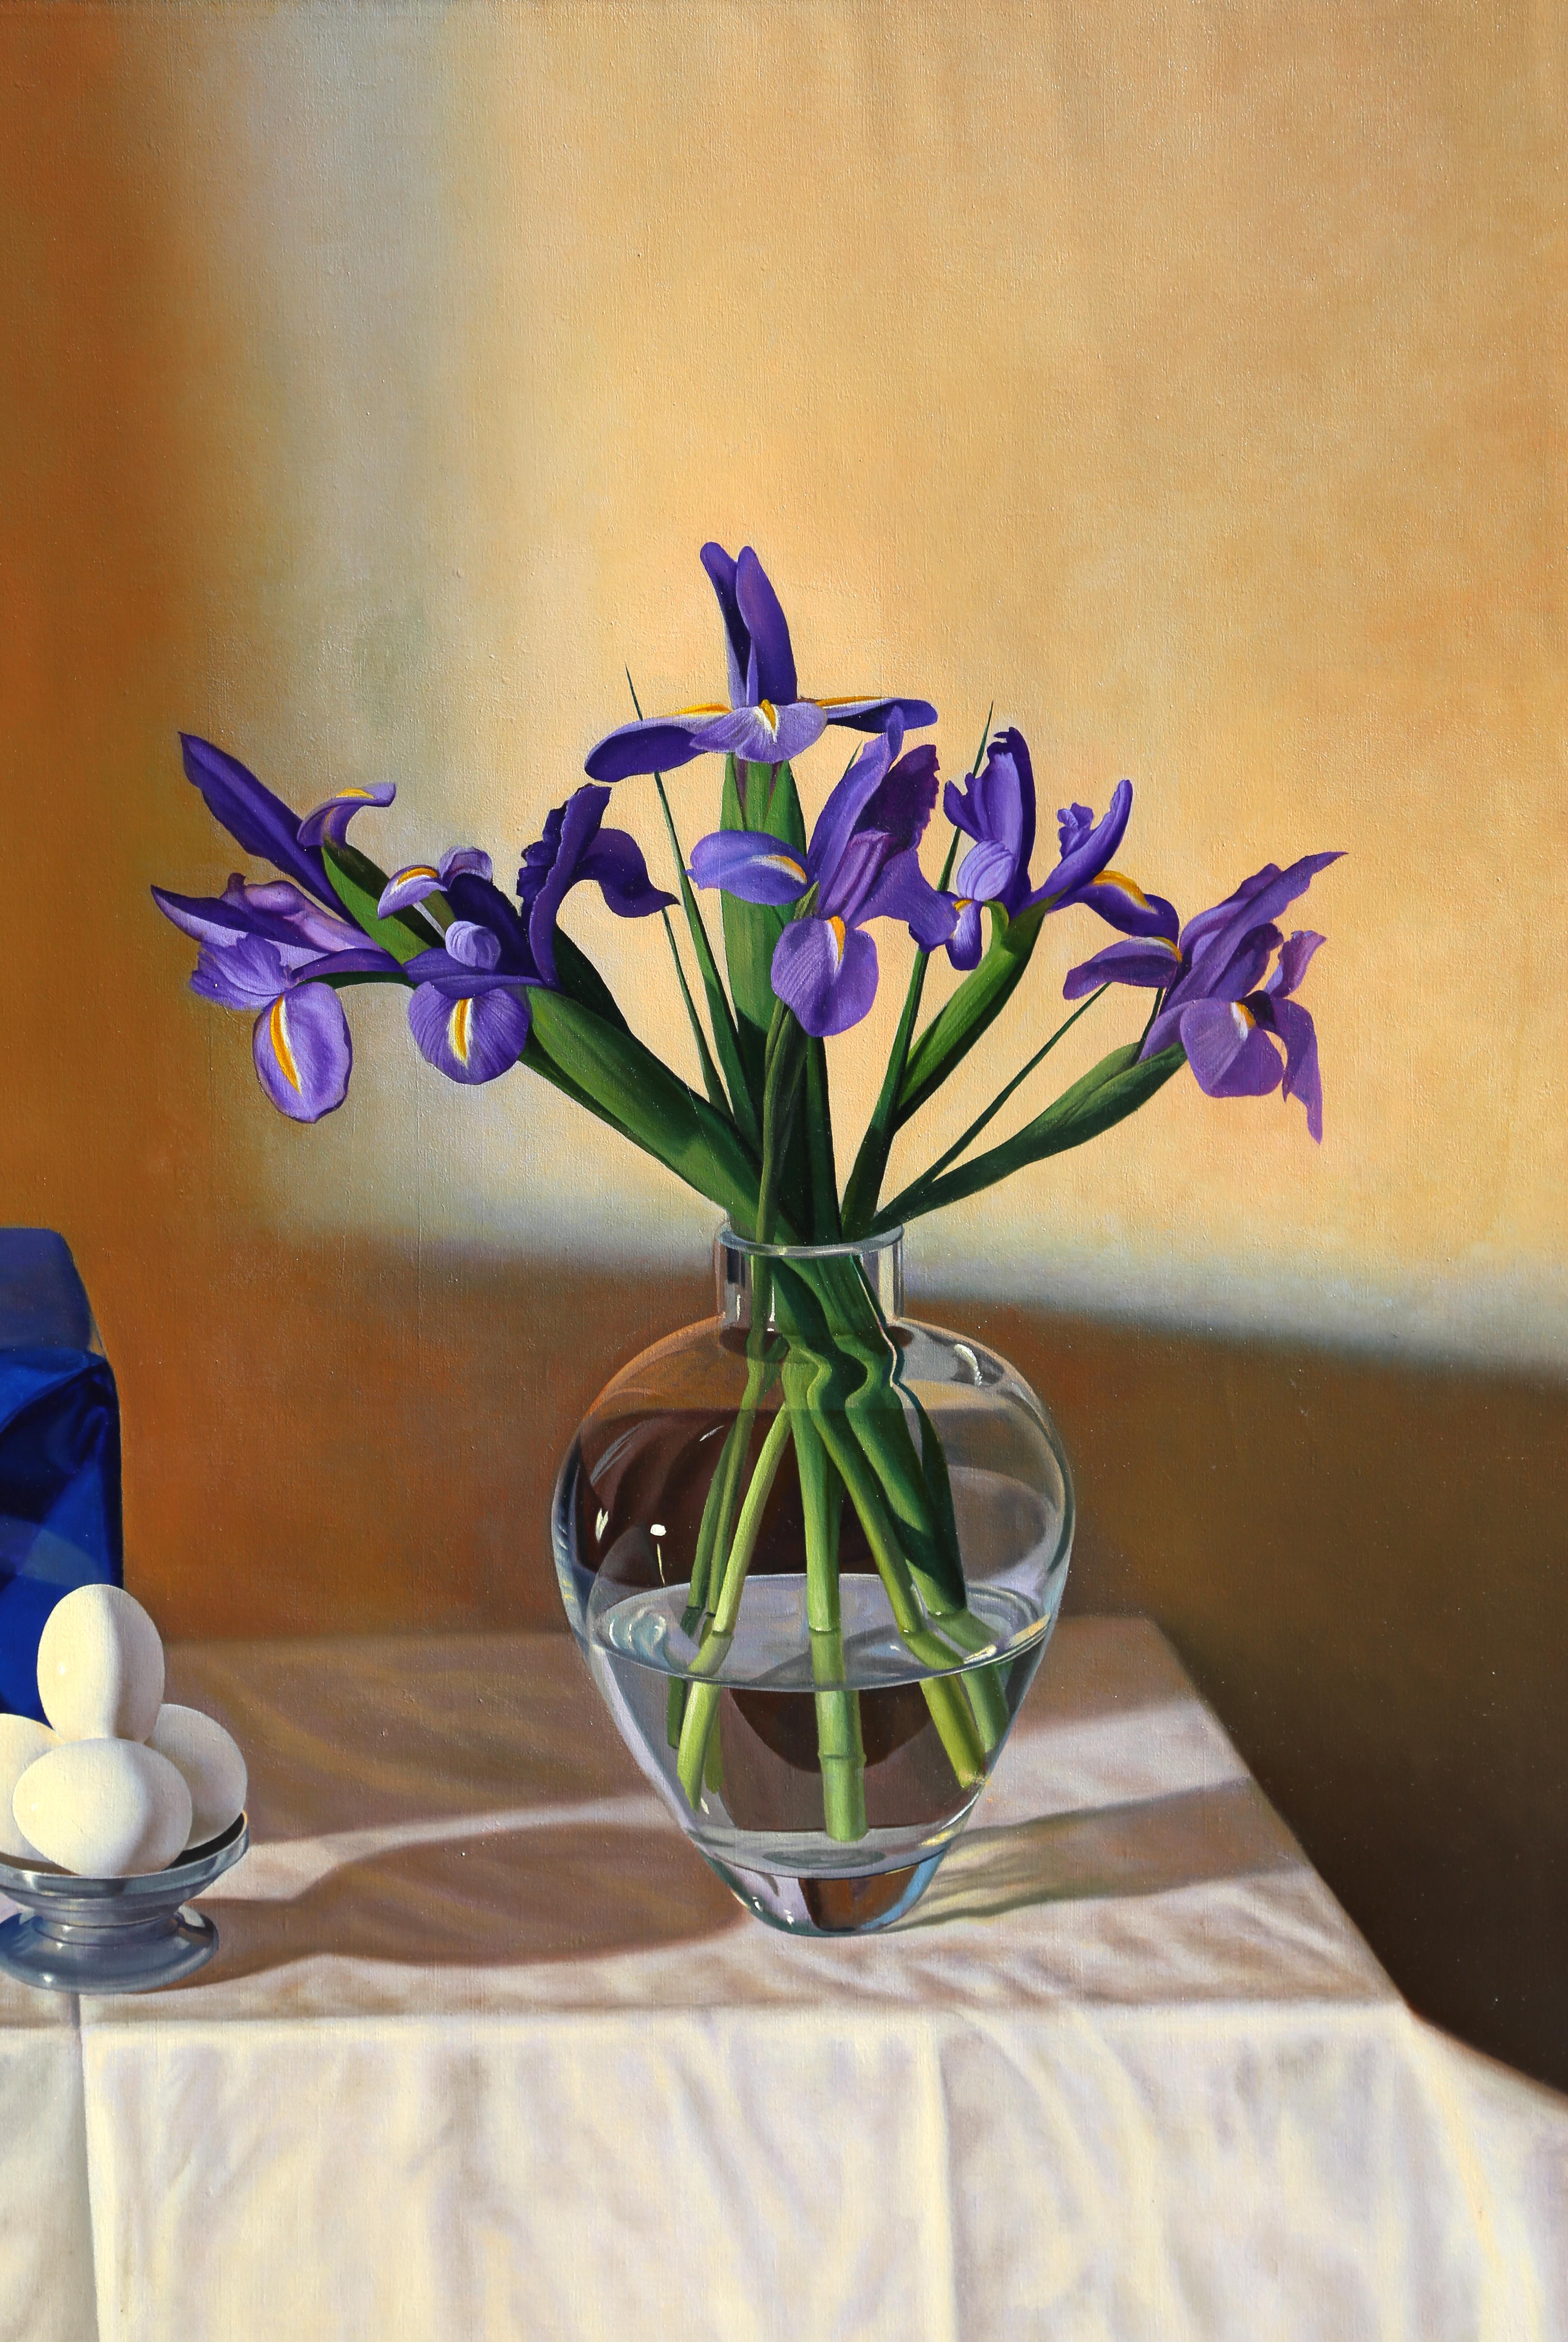 Wrapped Package and Irises - Painting by Gustavo Schmidt